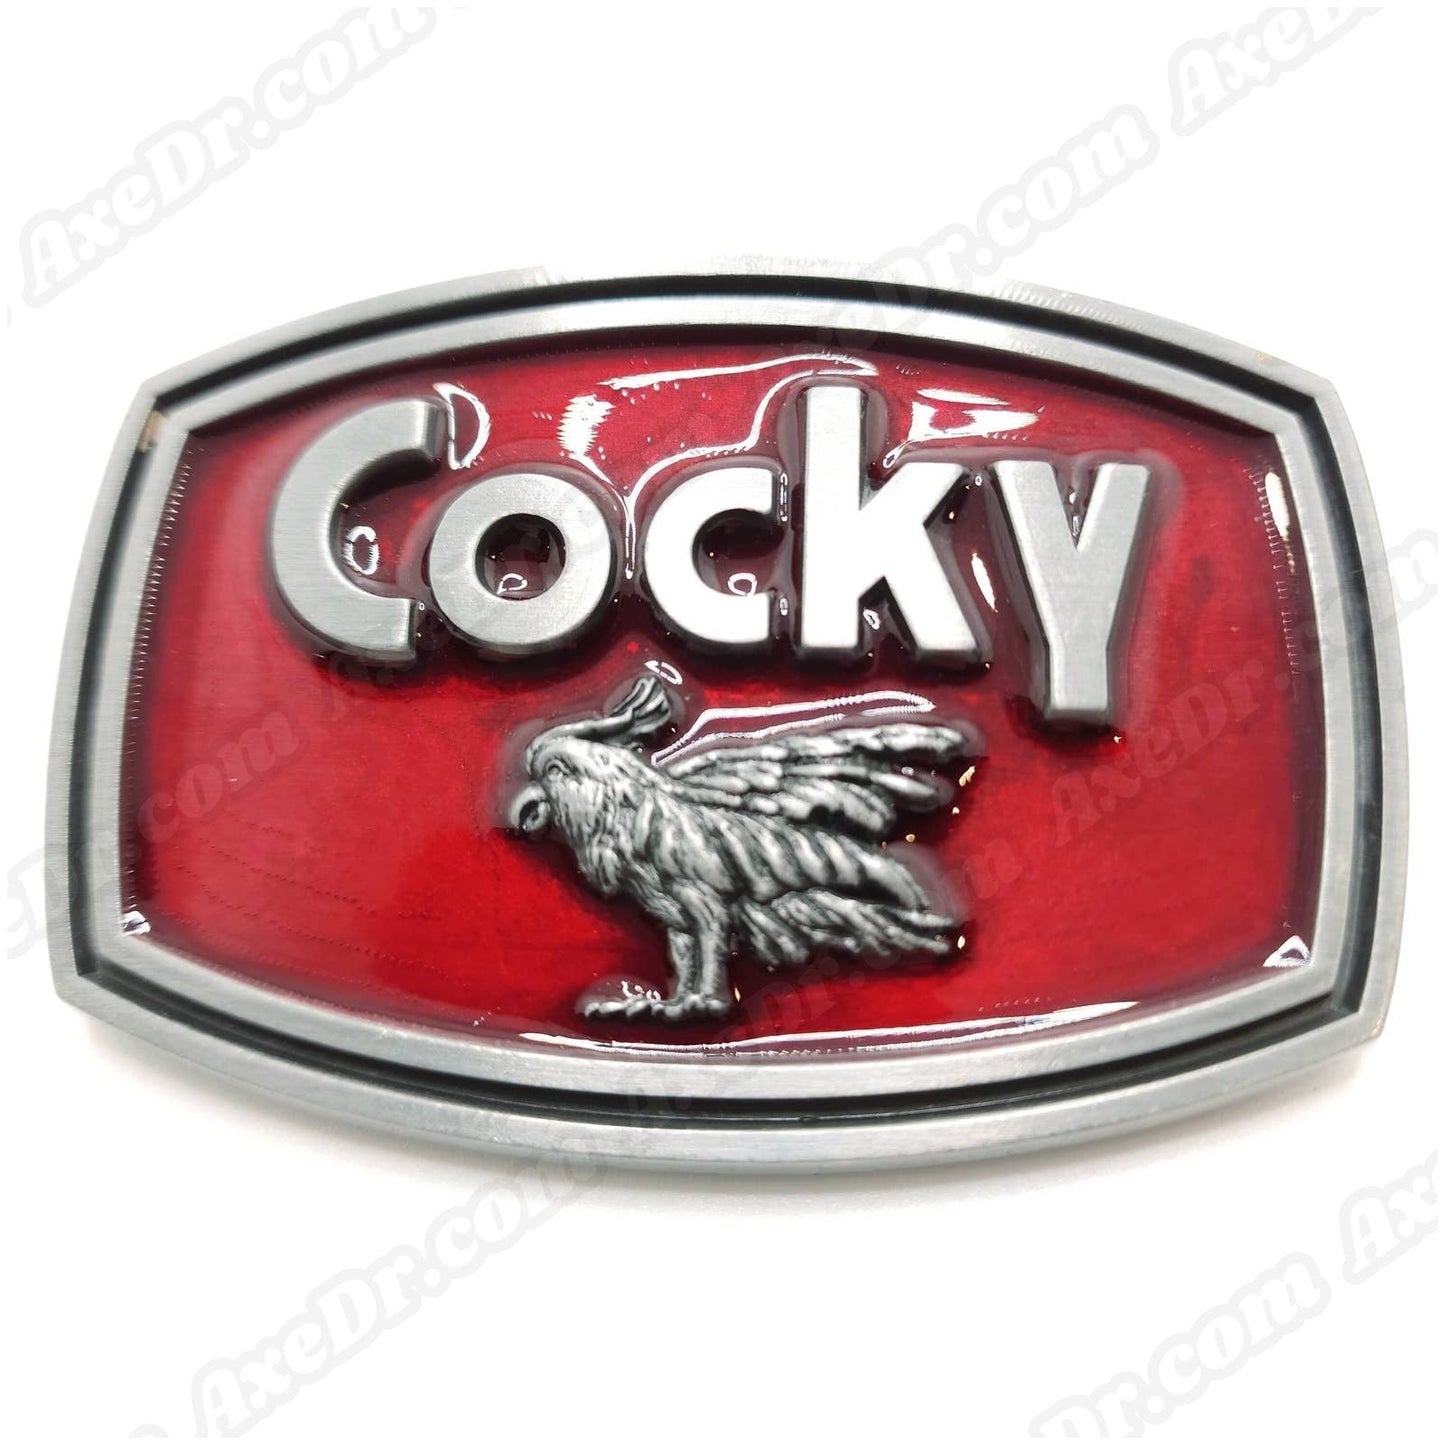 Cocky Belt Buckle with Genuine Leather Belt shop.AxeDr.com Belt Buckle, Belt with Buckle, Bones, Buckles with Belt, Cocky, Funny, Funny Belt Buckle, Gag Gift, 